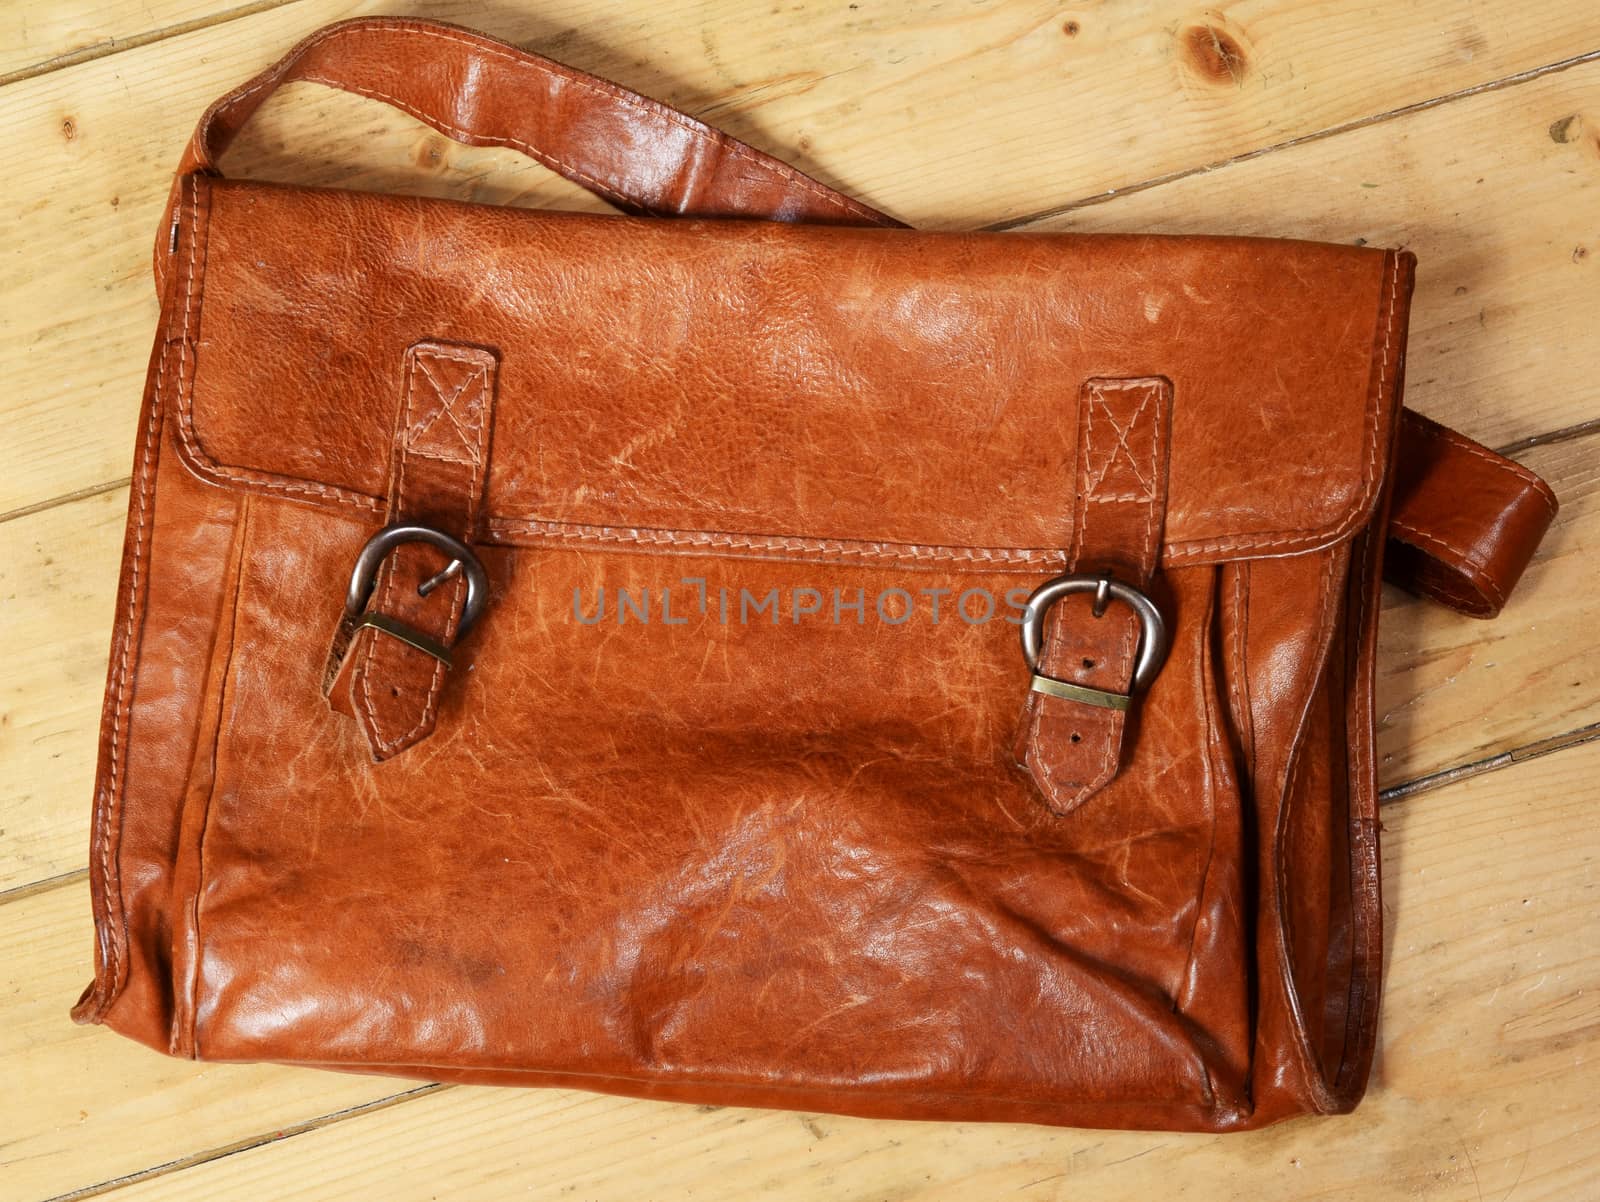 old leather bag by sarkao